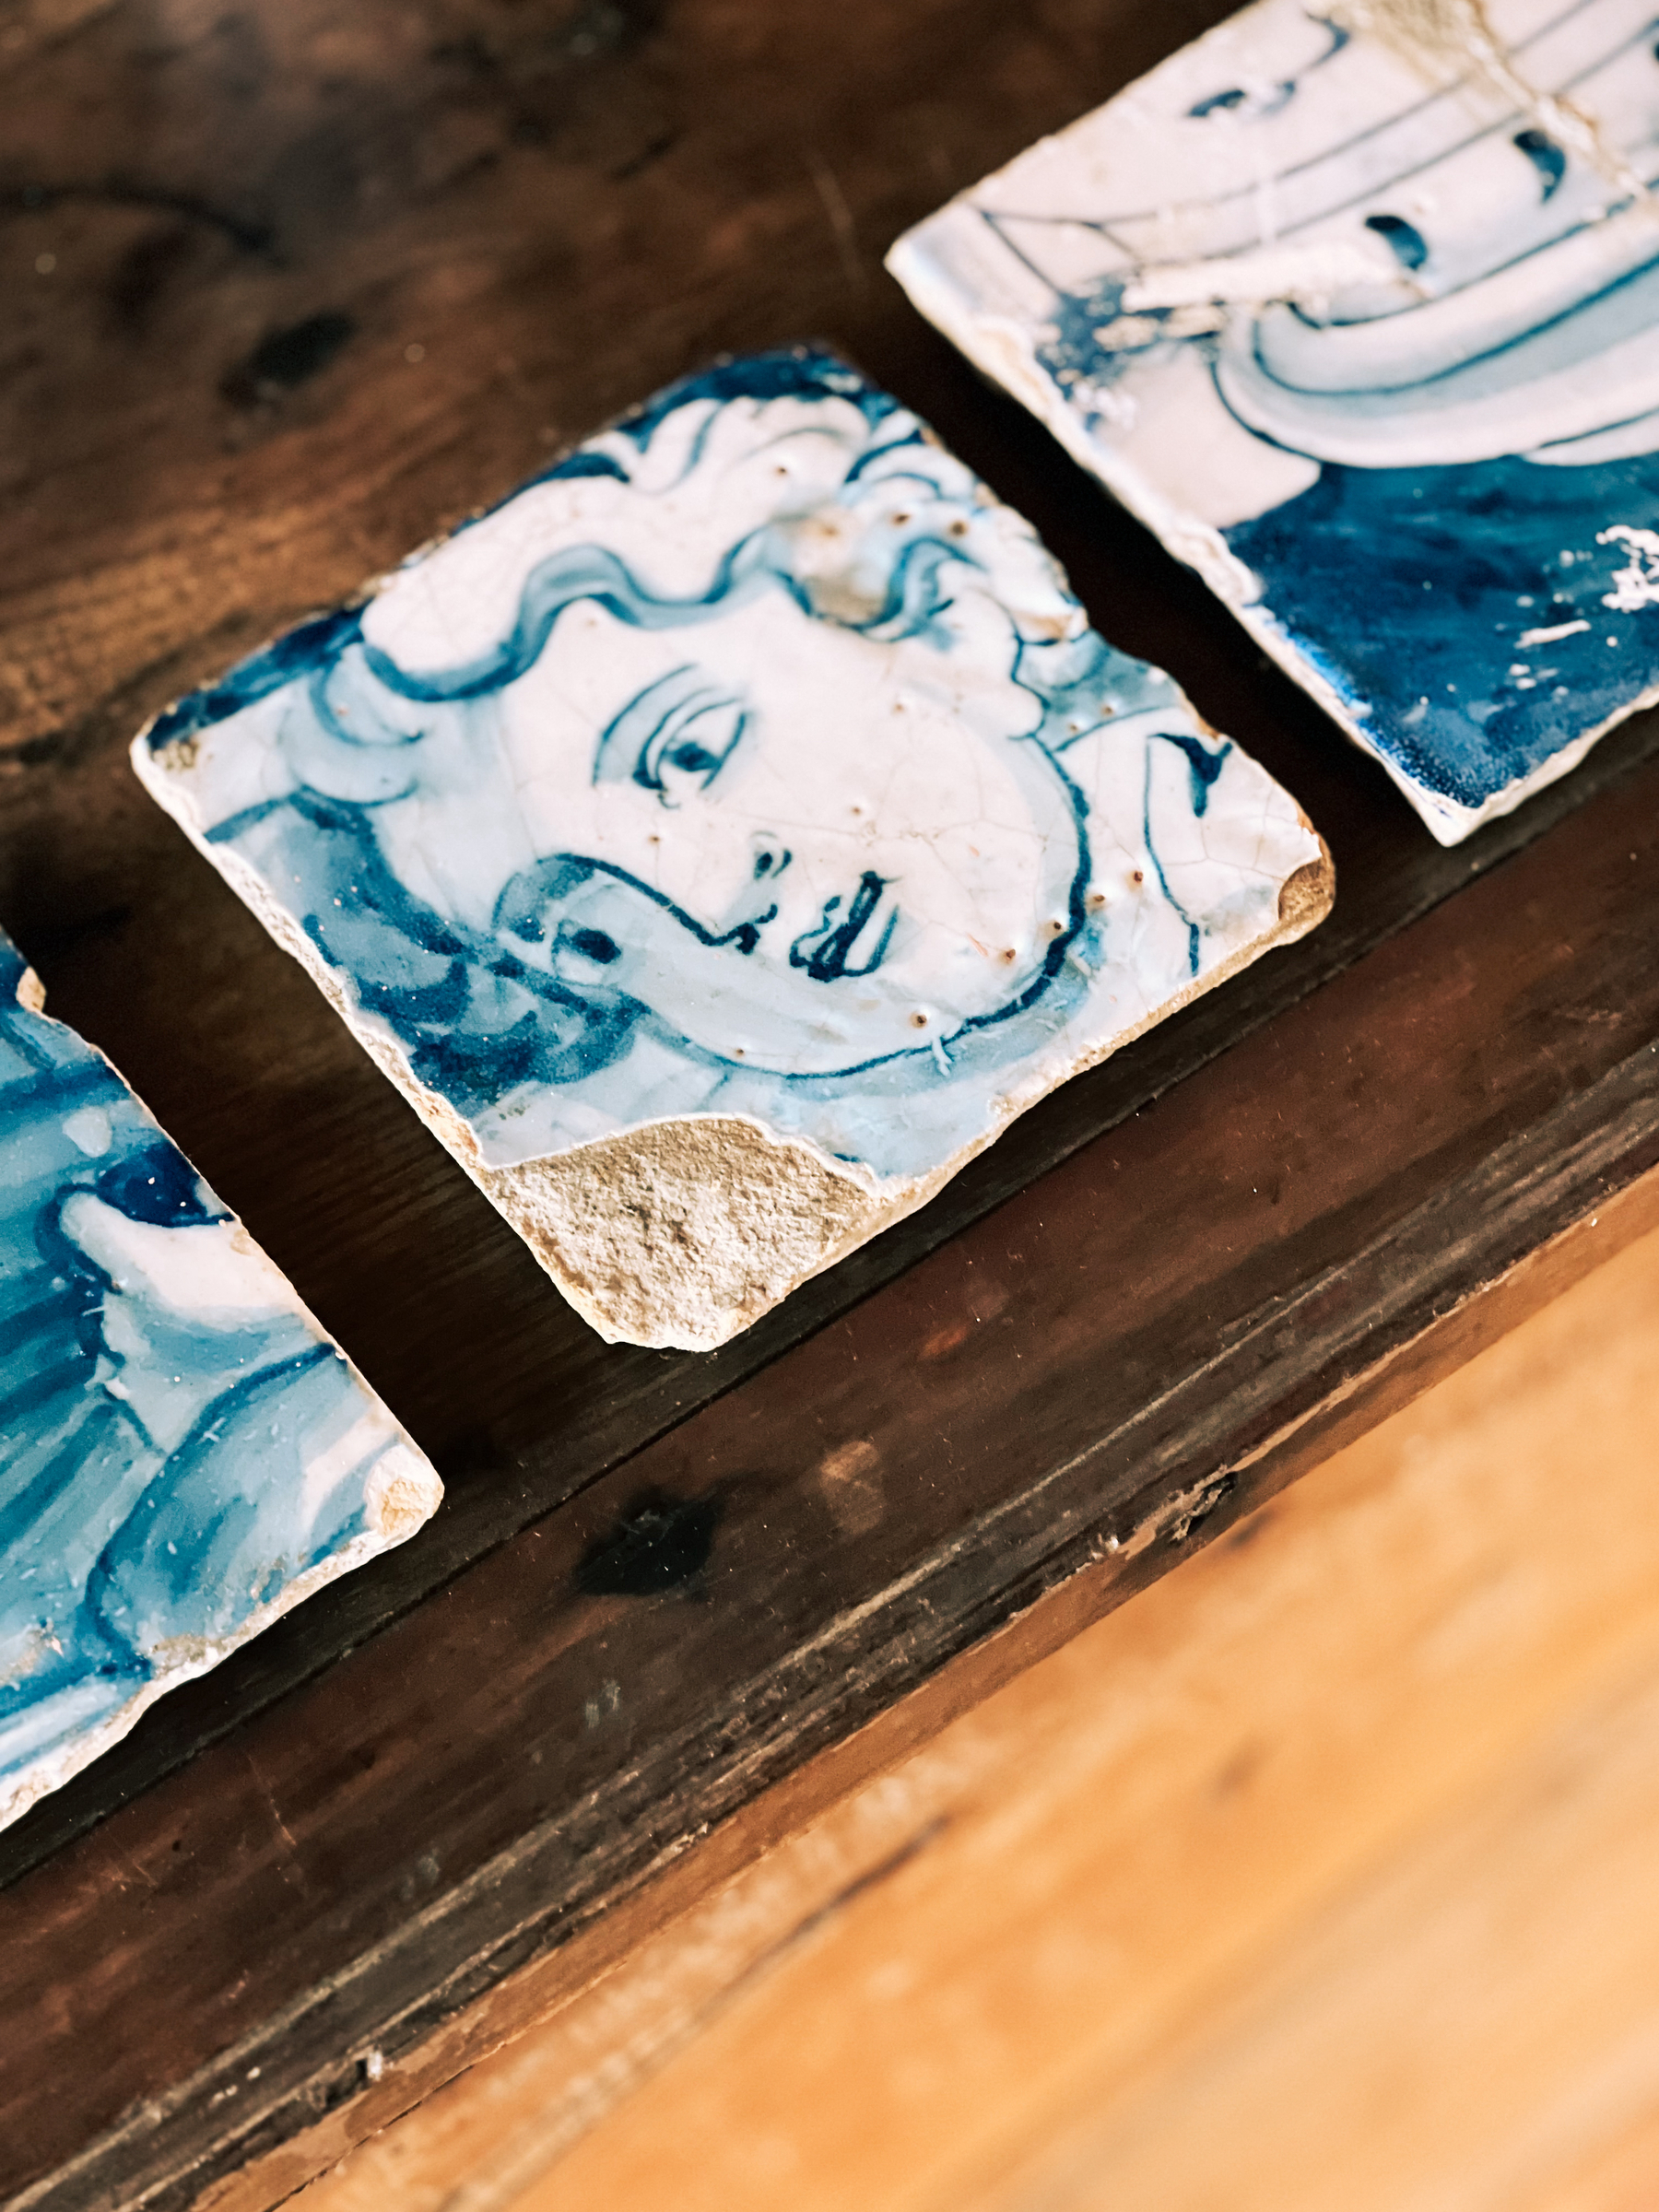 Blue and white ceramic tiles with artistic representations of classical faces displayed on a wooden surface.